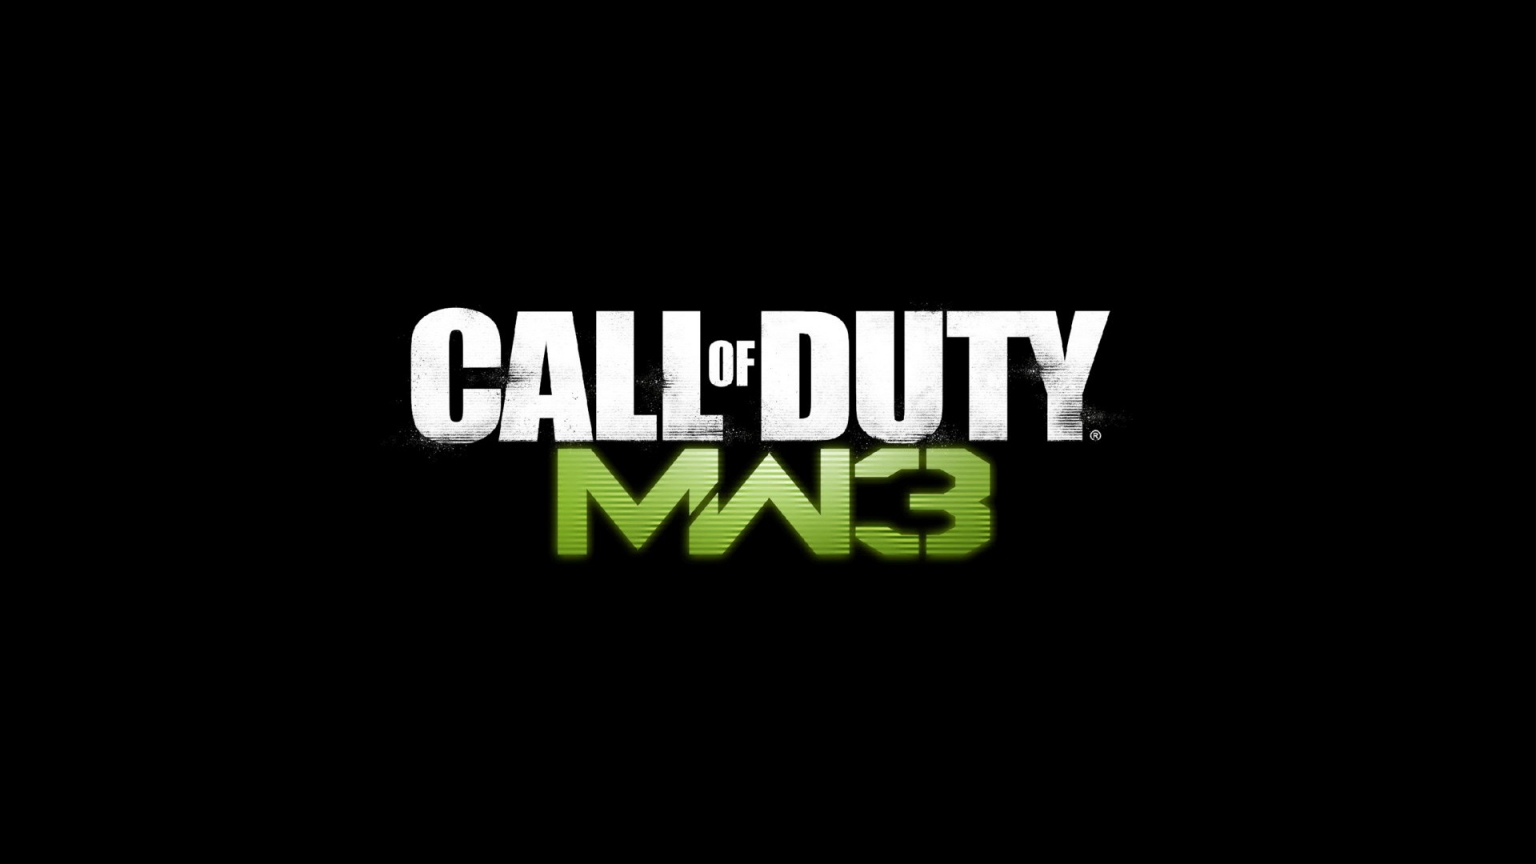 Call of Duty Modern Warfare 3 Game for 1536 x 864 HDTV resolution